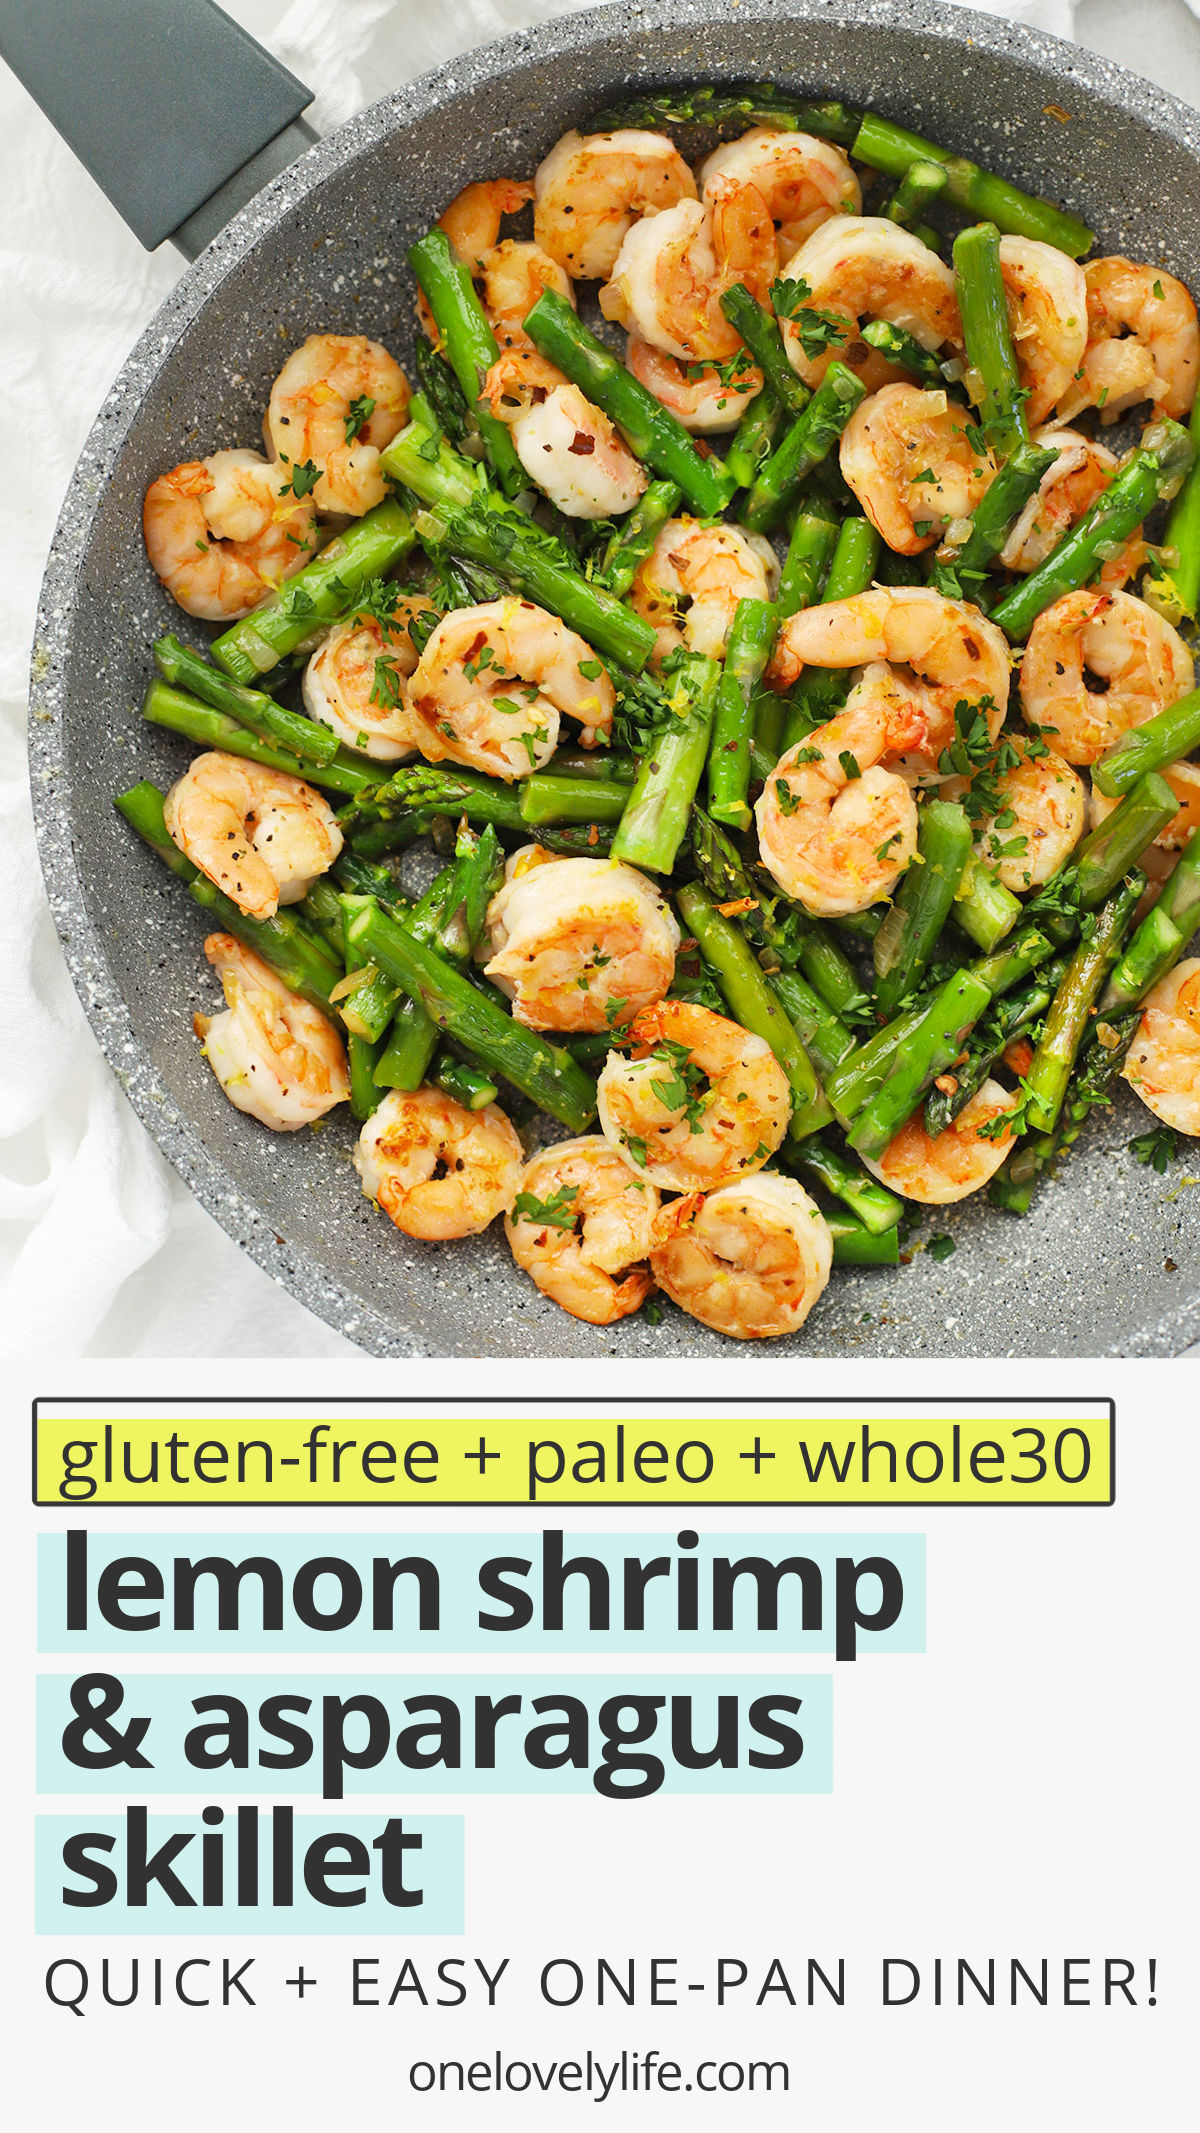 Lemon Shrimp & Asparagus Skillet - This one pan lemon shrimp with asparagus comes together quickly and packs in SO much gorgeous flavor. It's a weeknight wonder! (Gluten-Free, Paleo & Whole30-Friendly) // Shrimp recipe // Low carb dinner // one pan dinner // healthy dinner // paleo dinner // whole30 dinner // skillet recipe #shrimp #onepan #healthydinner #lowcarb #glutenfree #paleo #whole30